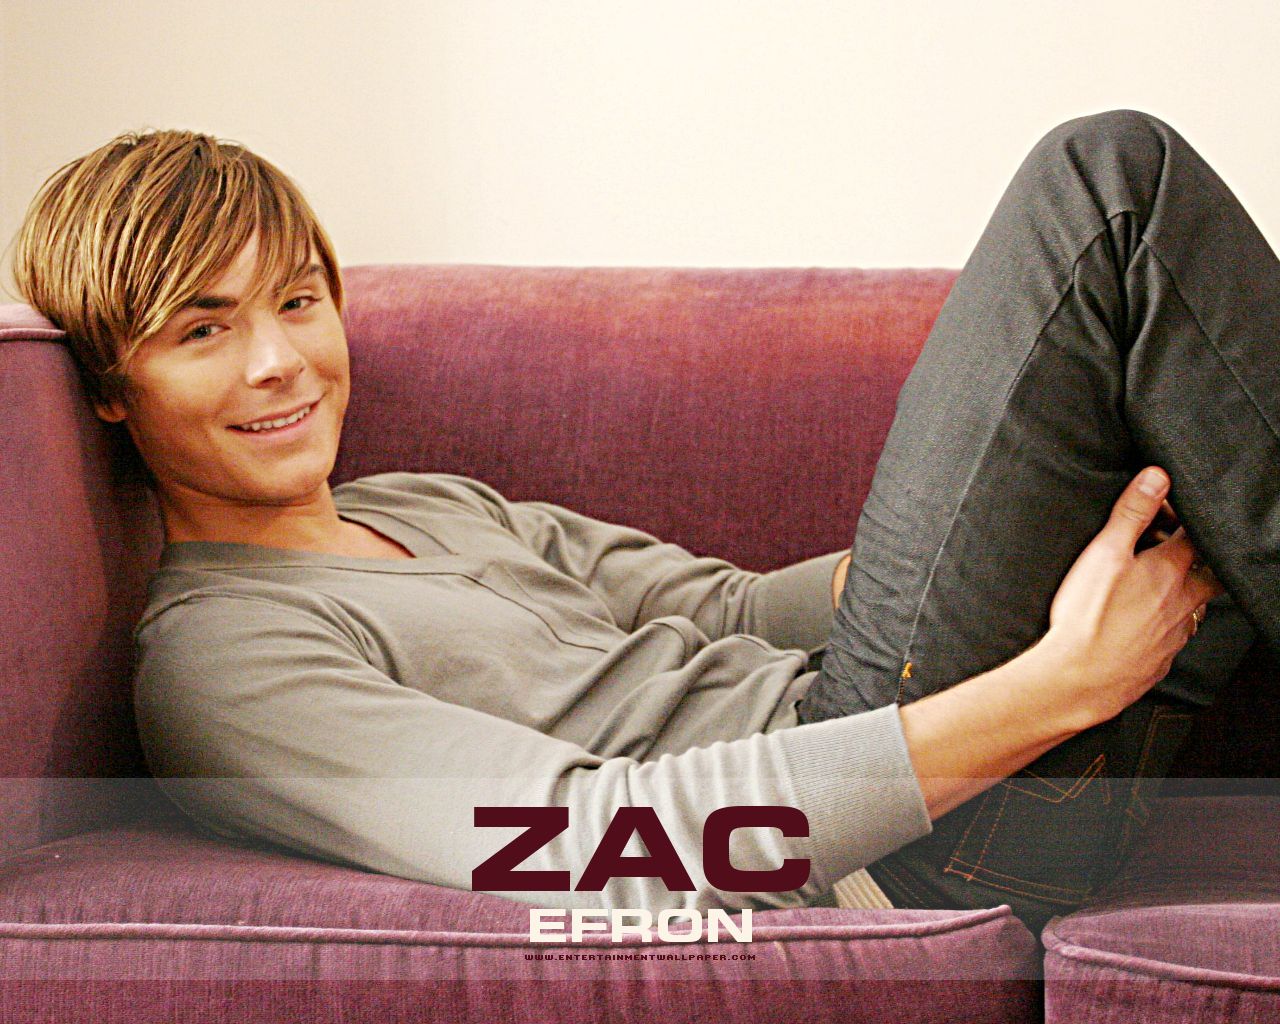 Zac Efron hd Wallpapers 2012 | All Hollywood Stars